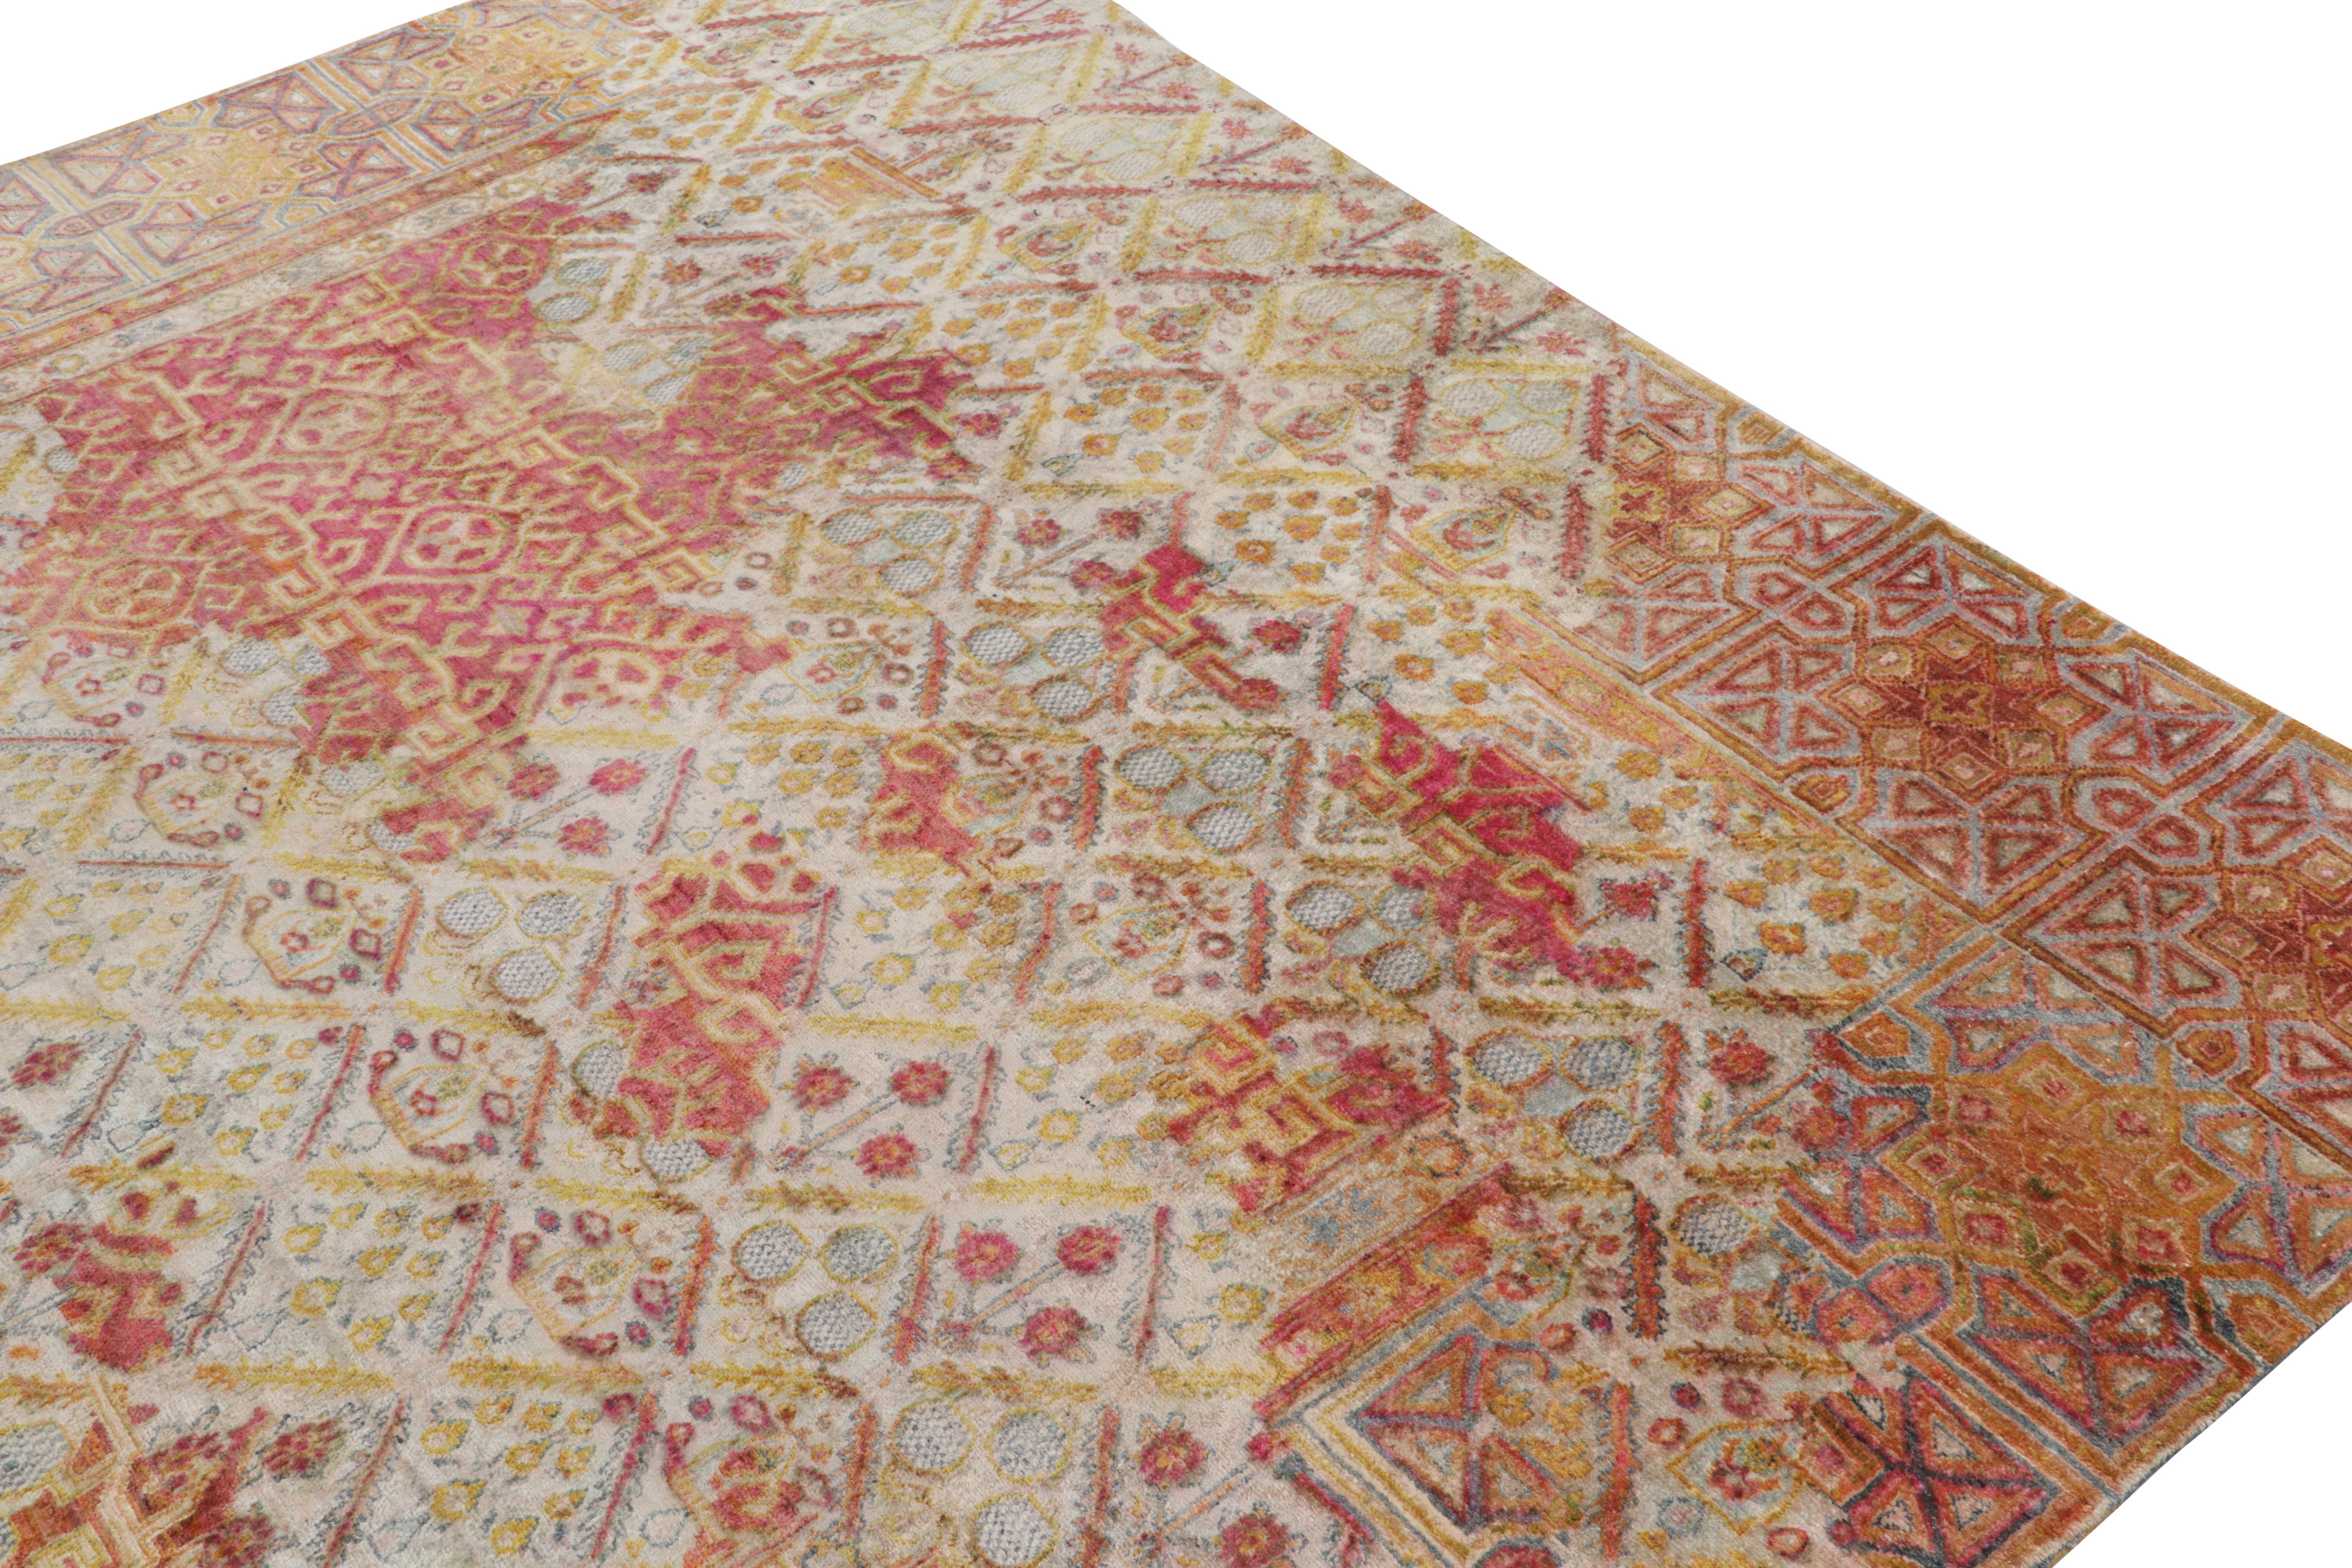 Contemporary Rug & Kilim’s Hand-Knotted Floral Rug in Red, Gold, Blue Geometric Pattern For Sale